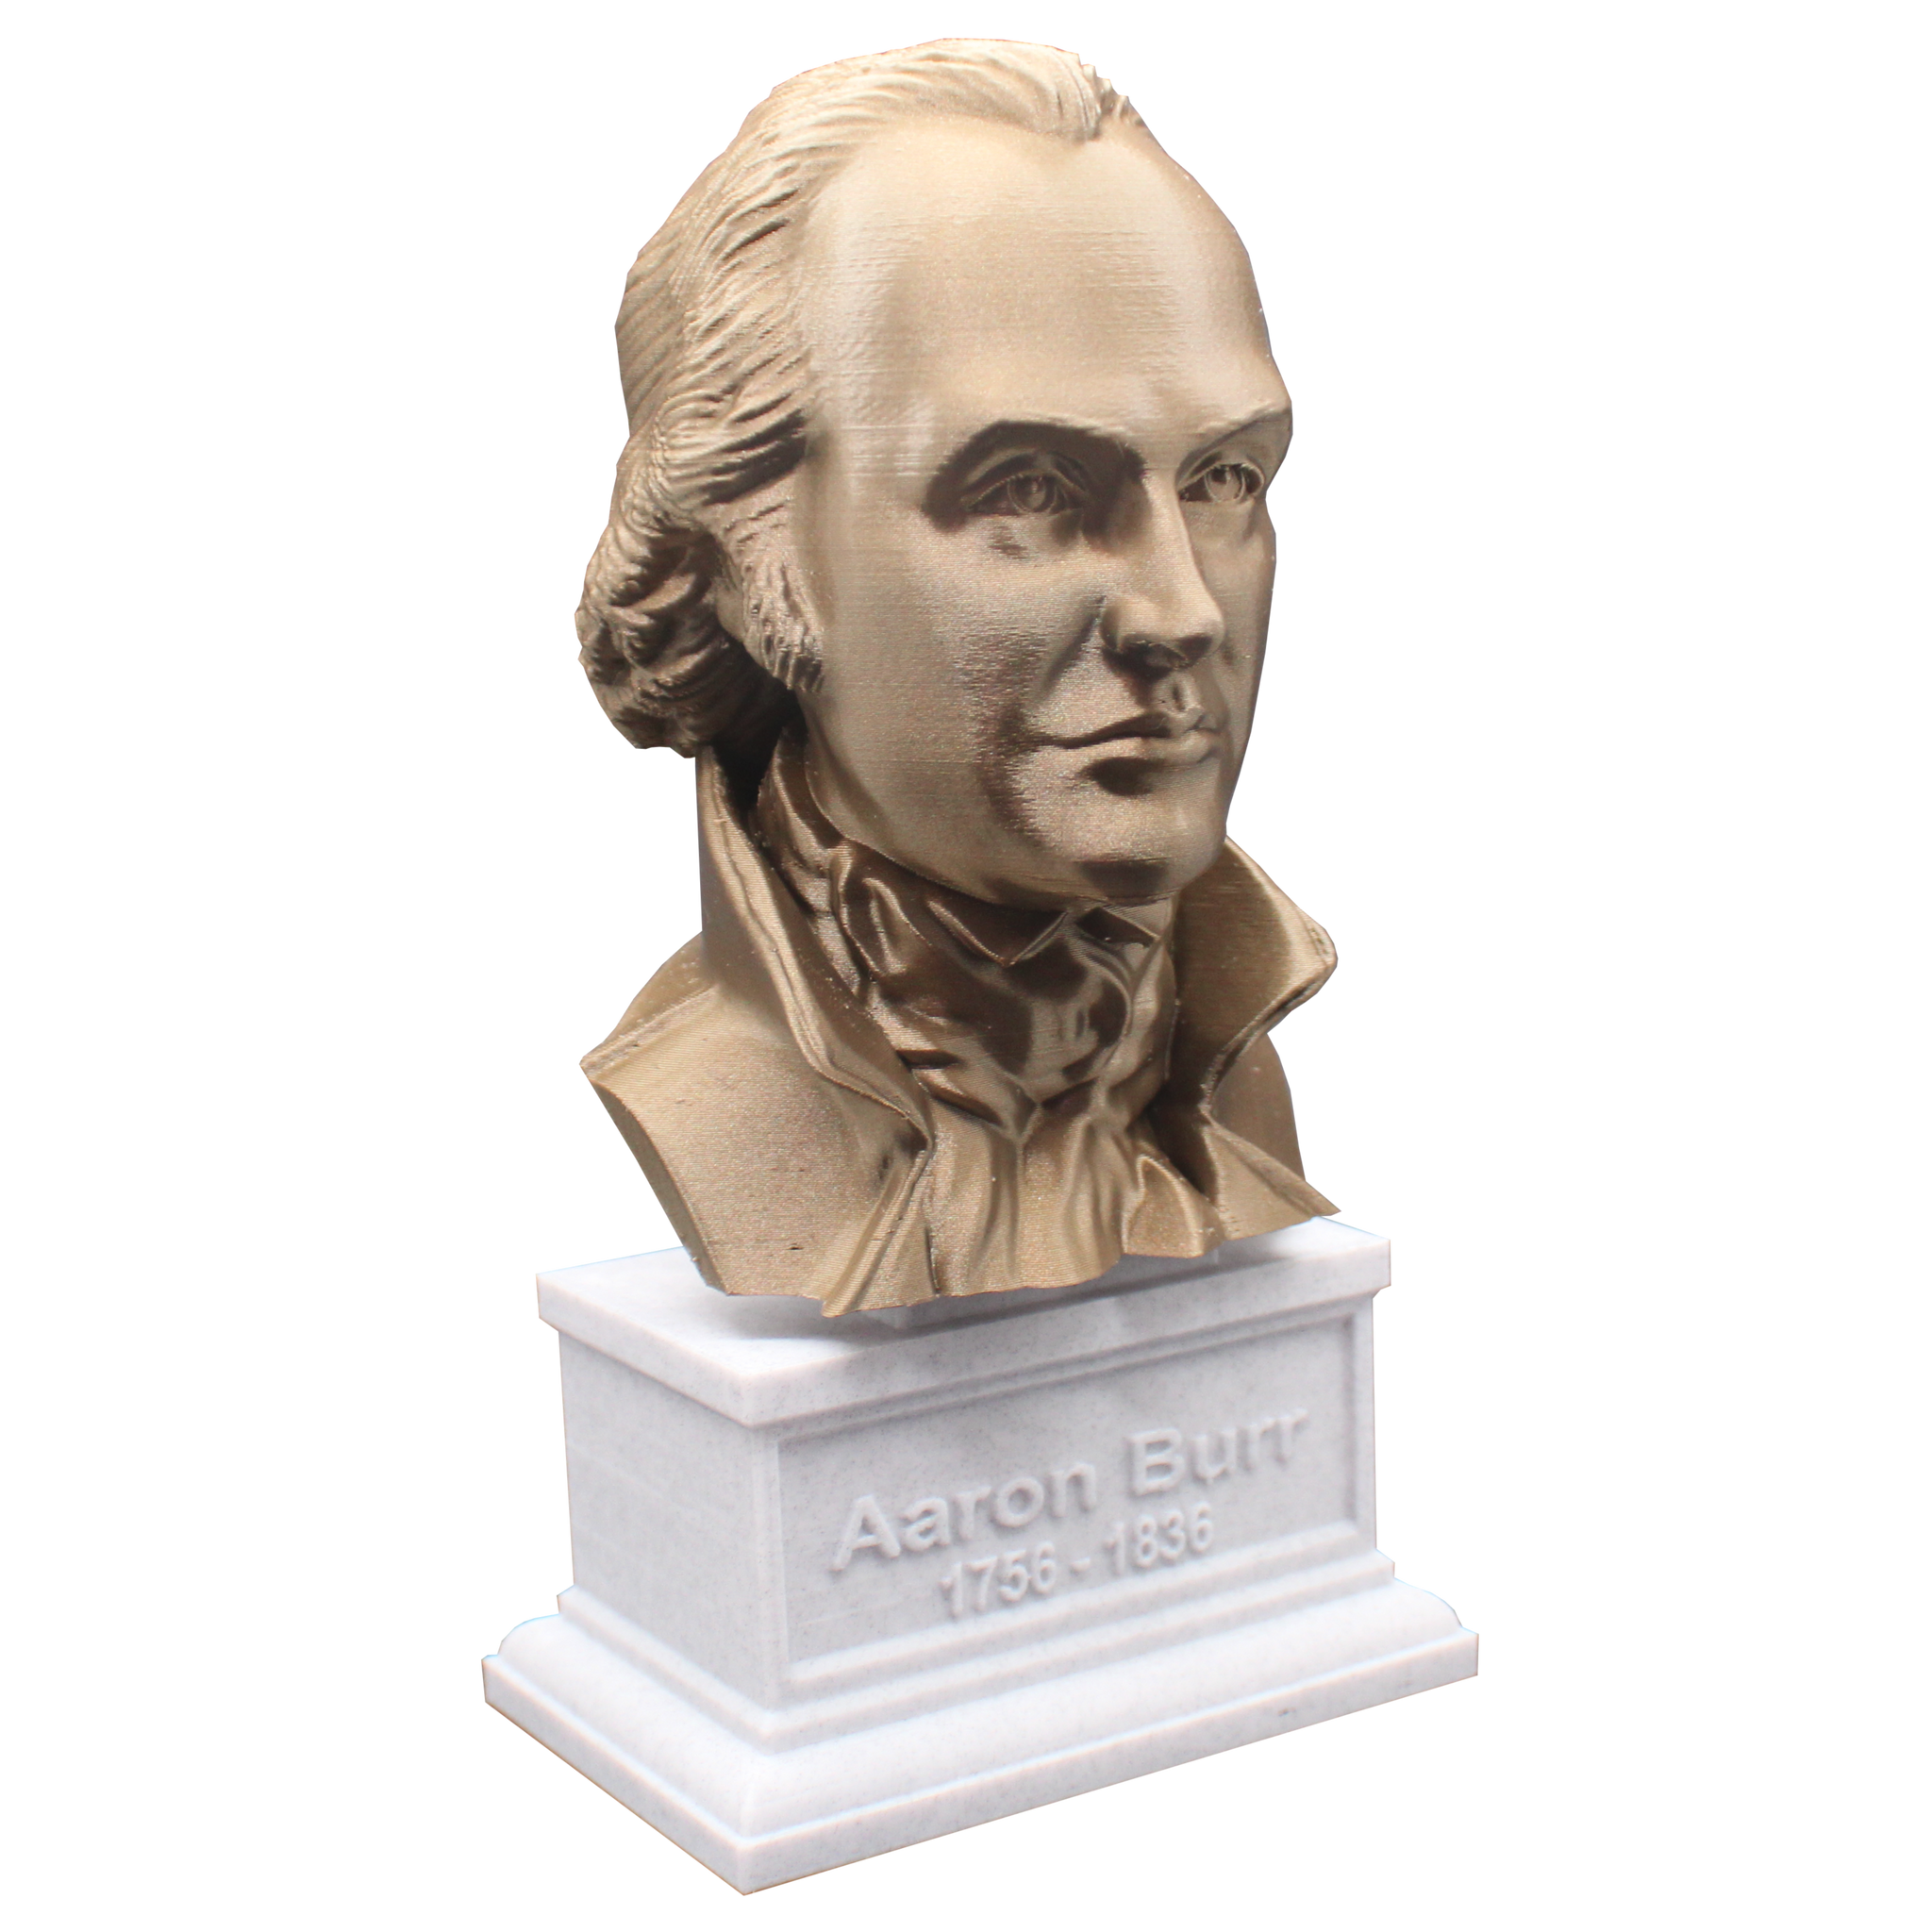 Aaron Burr US Vice President and Lawyer Sculpture Bust on Box Plinth